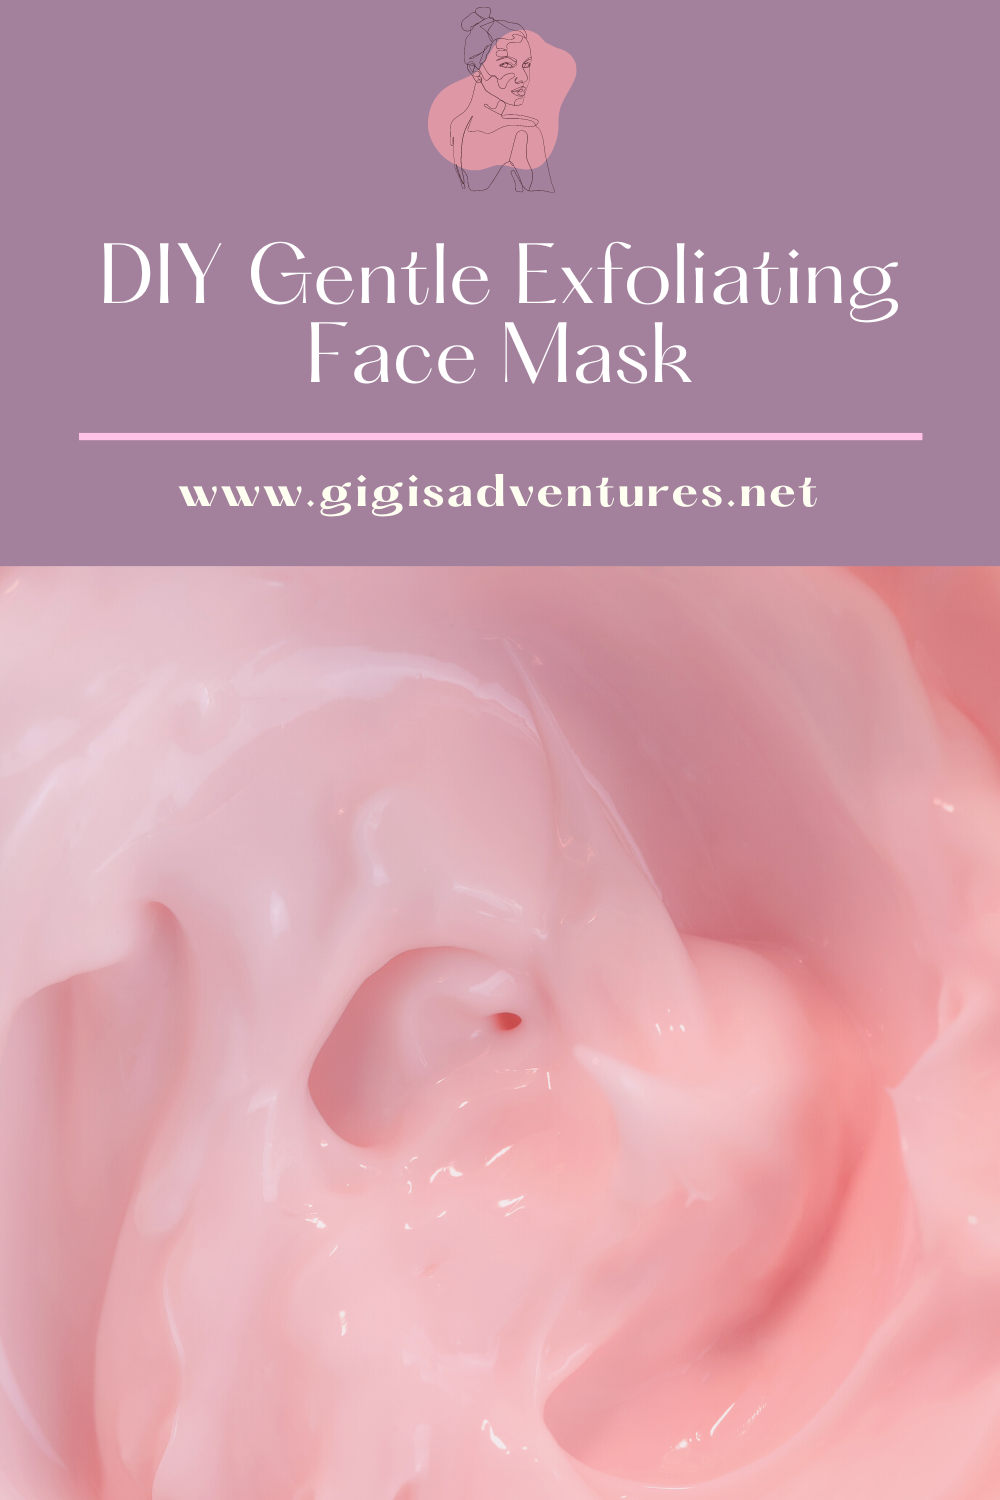 DIY Gentle Exfoliating Face Mask - Moisturizes & Fights Imperfections